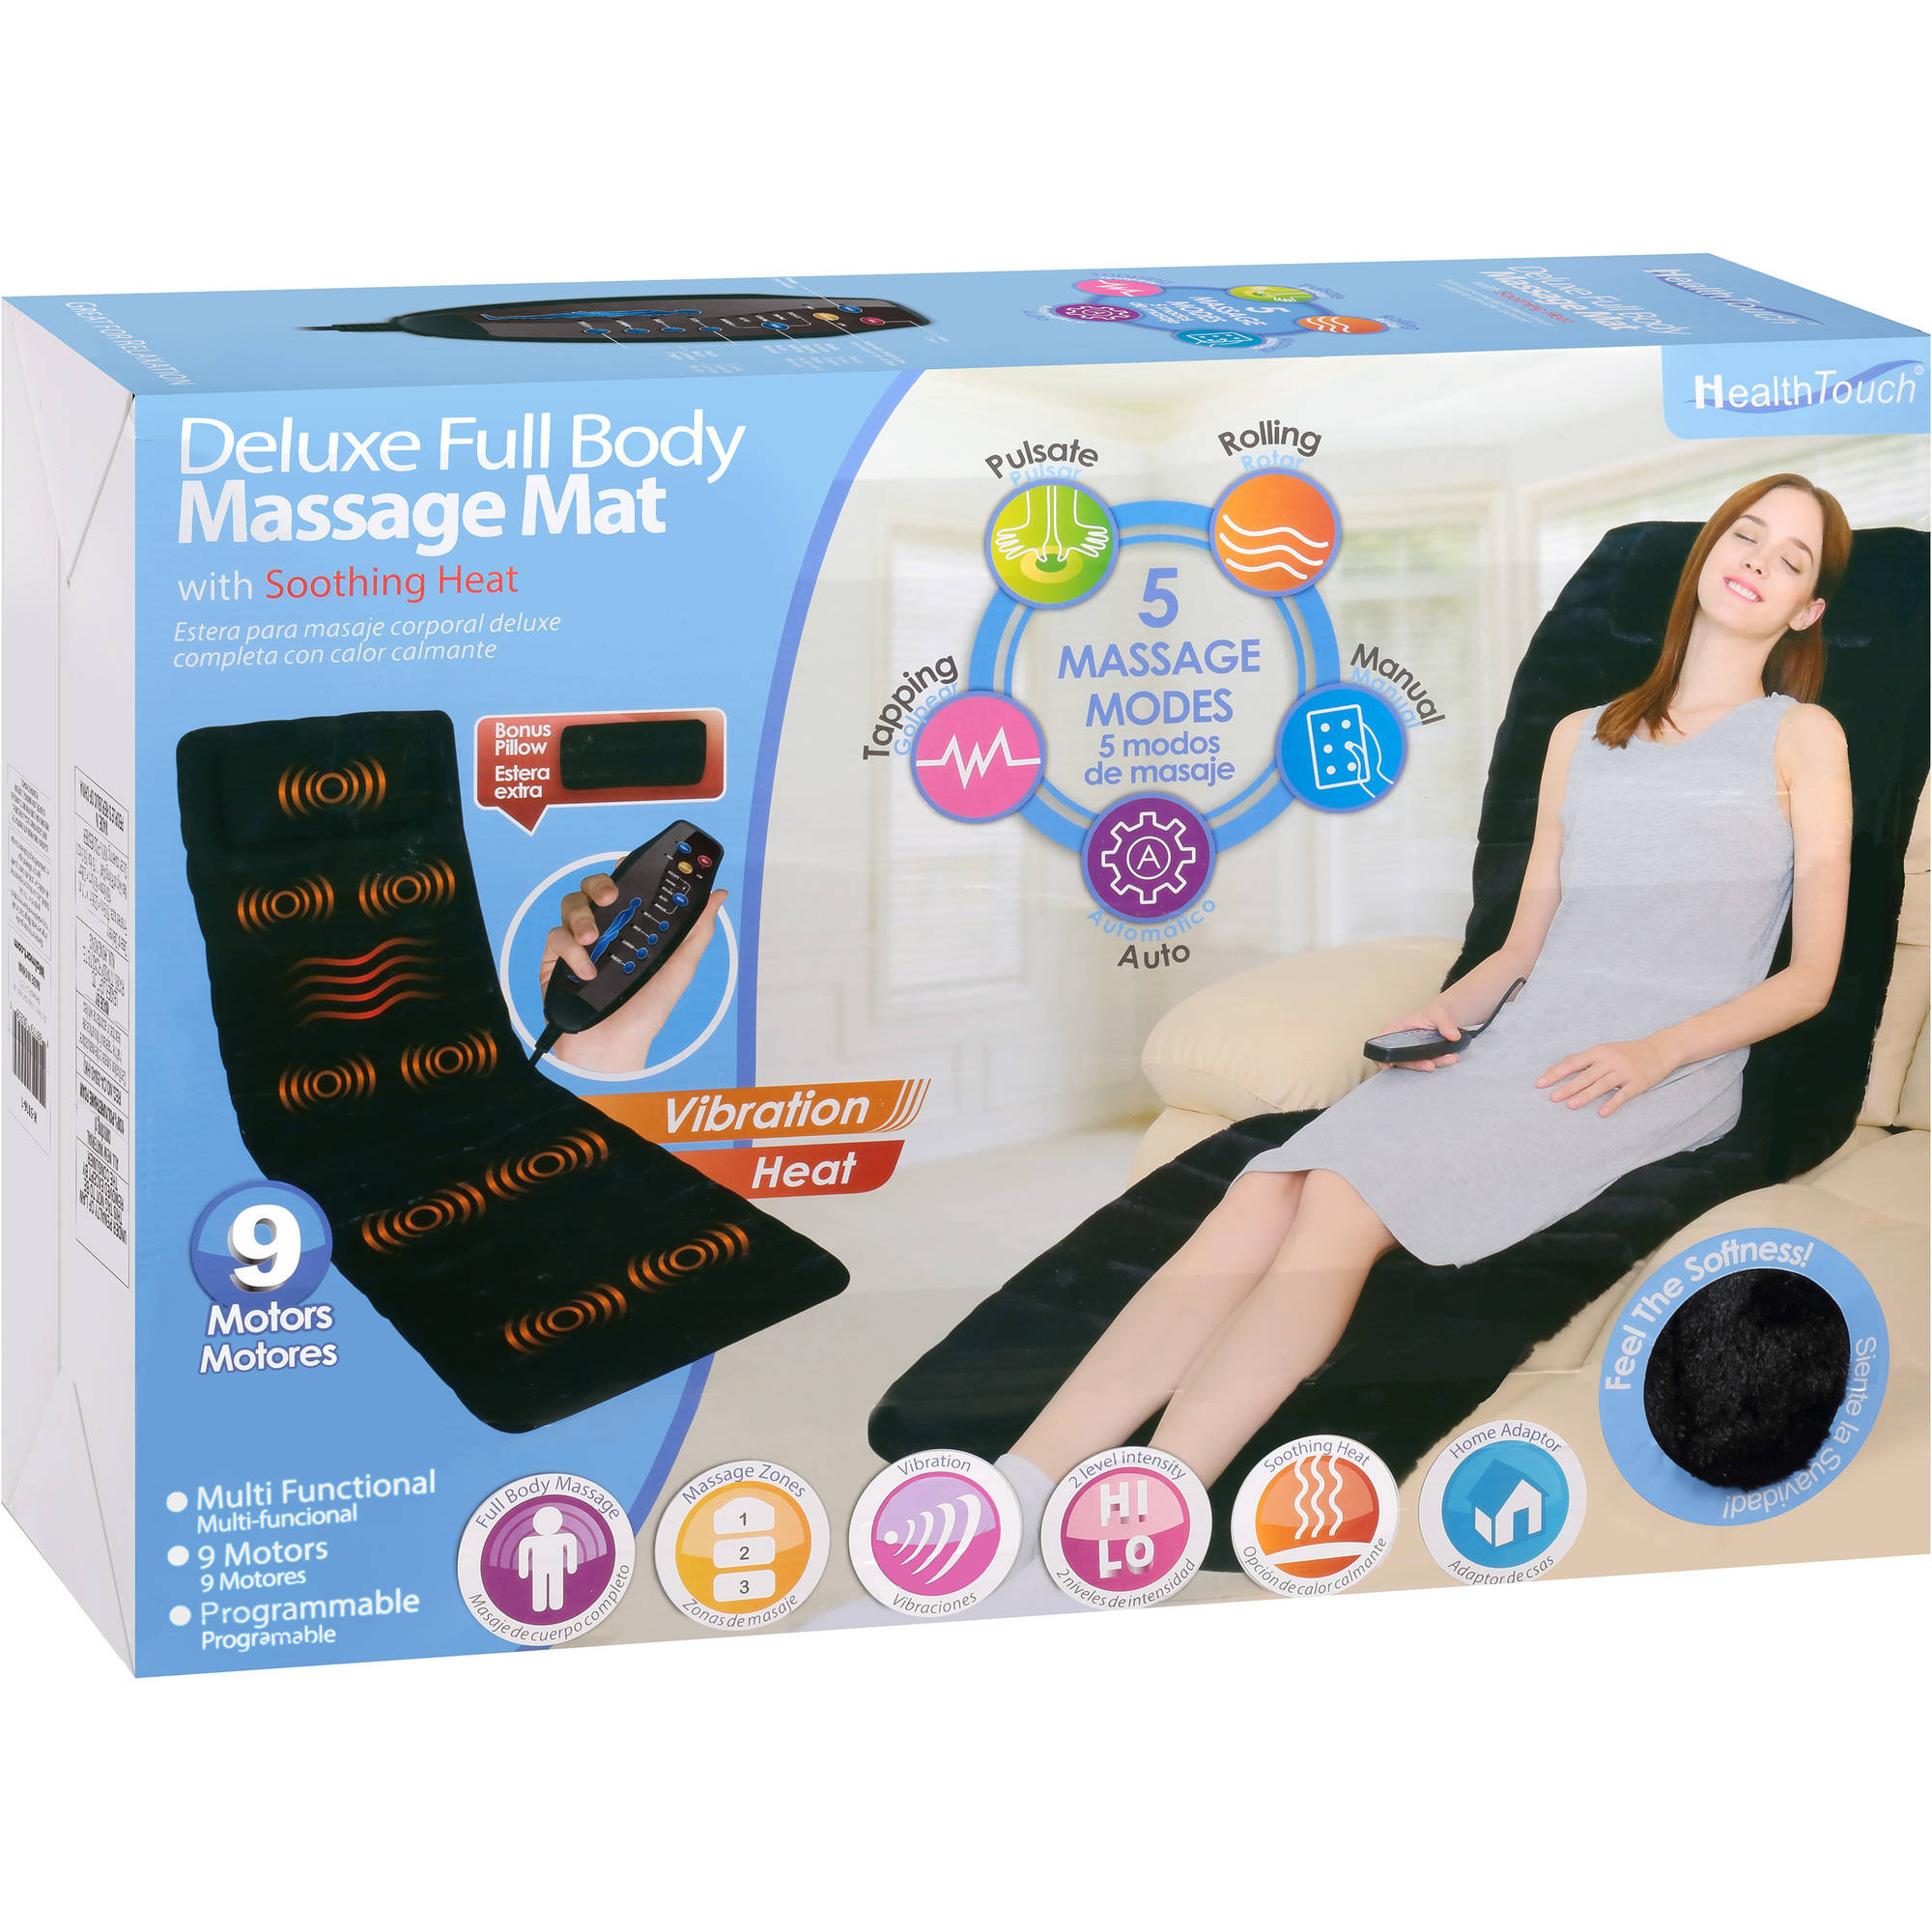 Fireplace Accessories Walmart Lovely Health touch Deluxe Full Body Massage Mat with soothing Heat